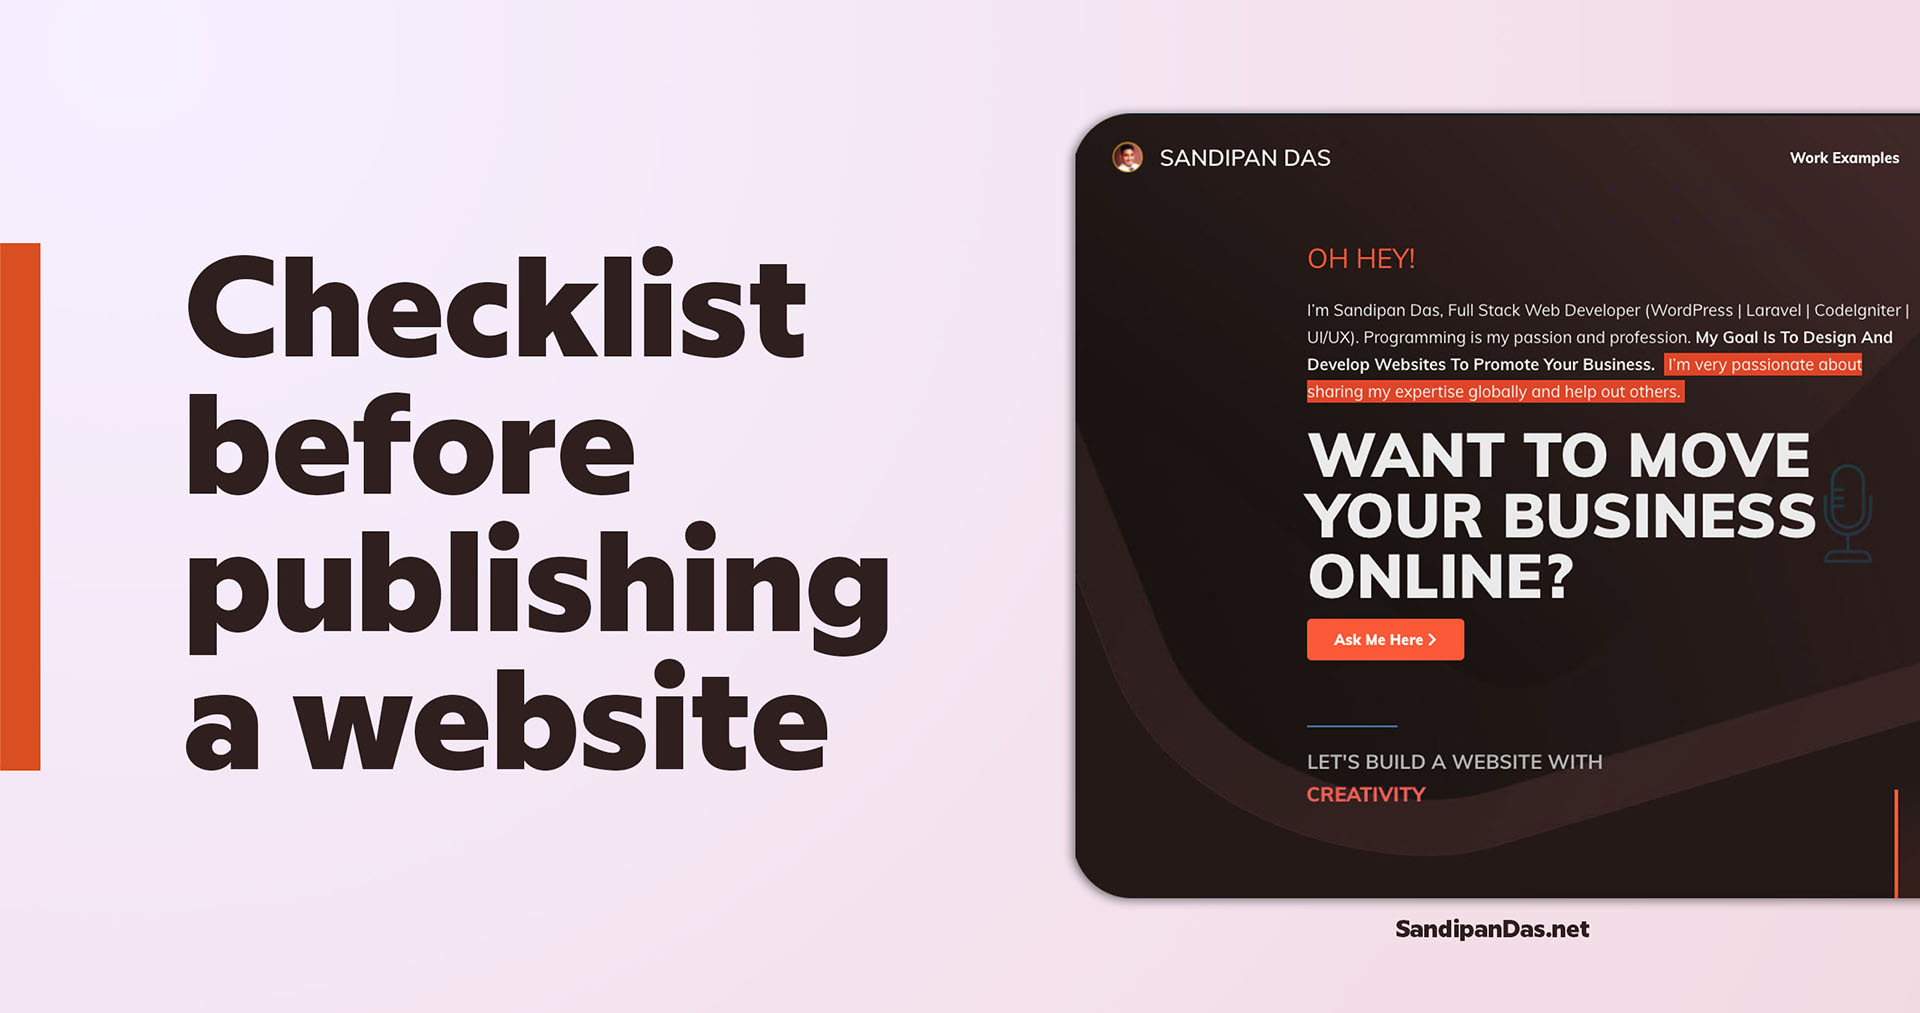 Checklist before publishing a website